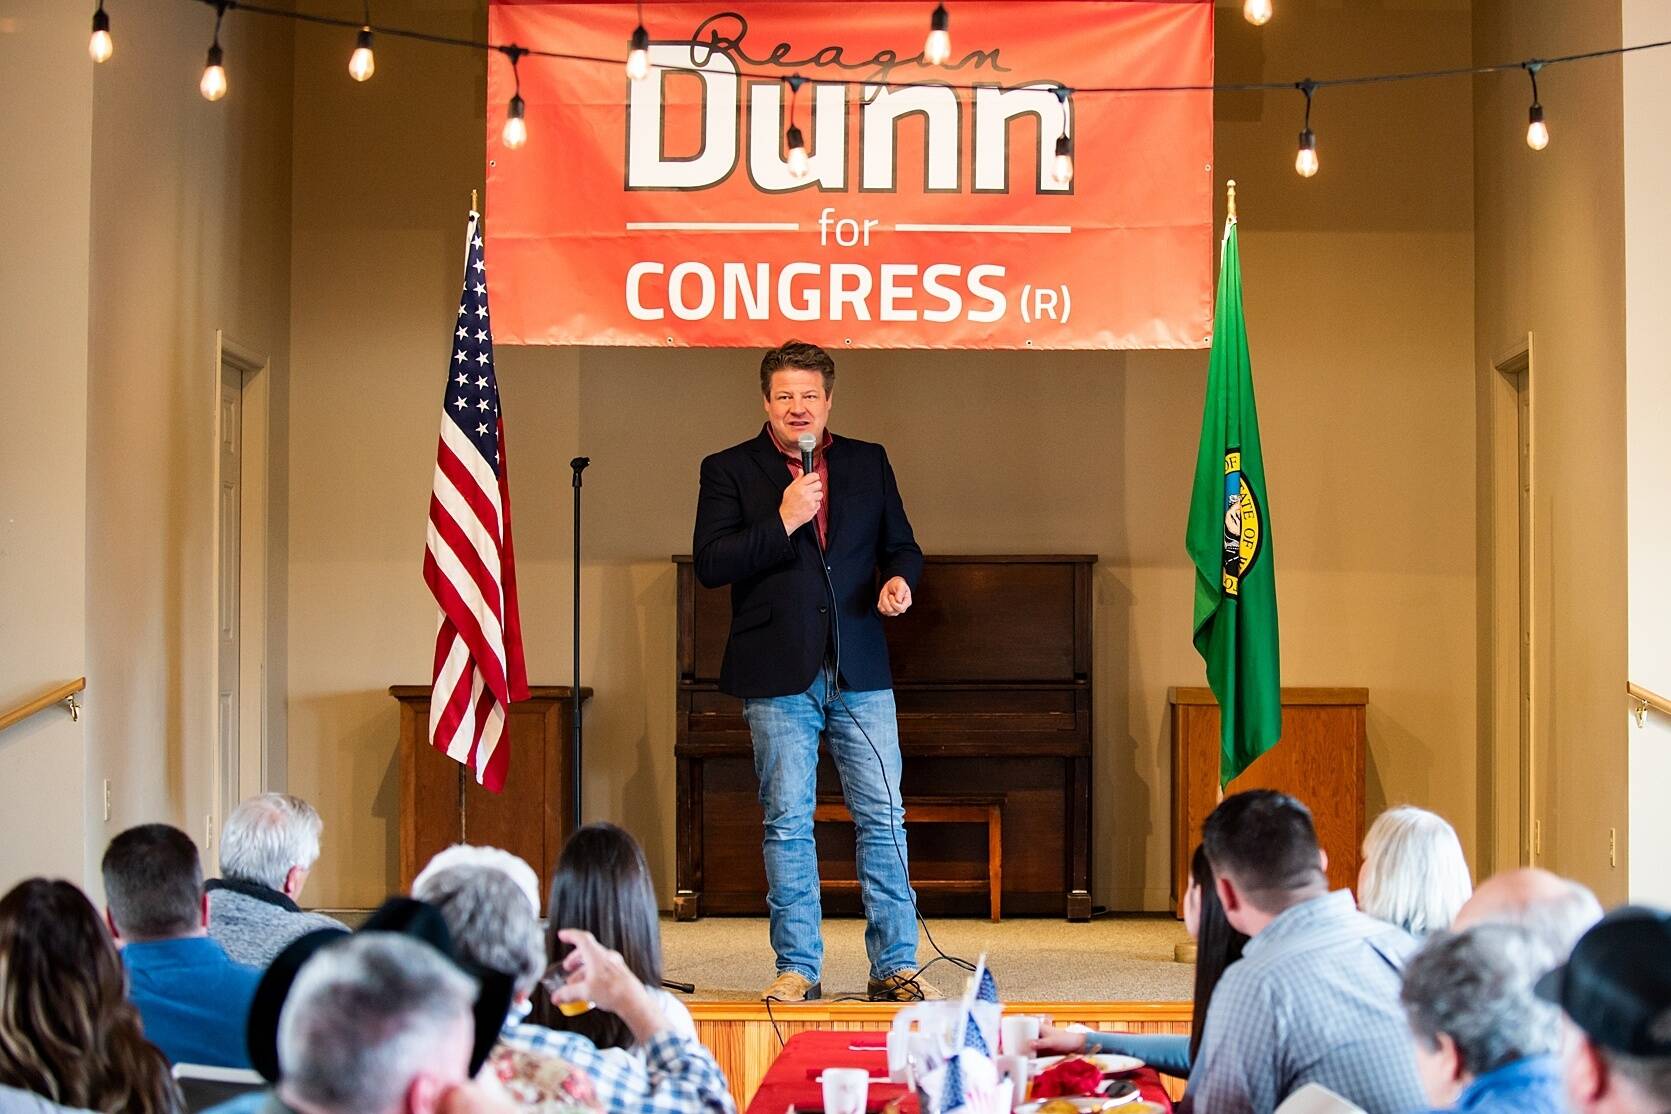 King County Councilmember Reagan Dunn, who is running for U.S. Congress in the 8th District, speaks to supporters in March. Photo courtesy of Dunn’s Facebook campaign page